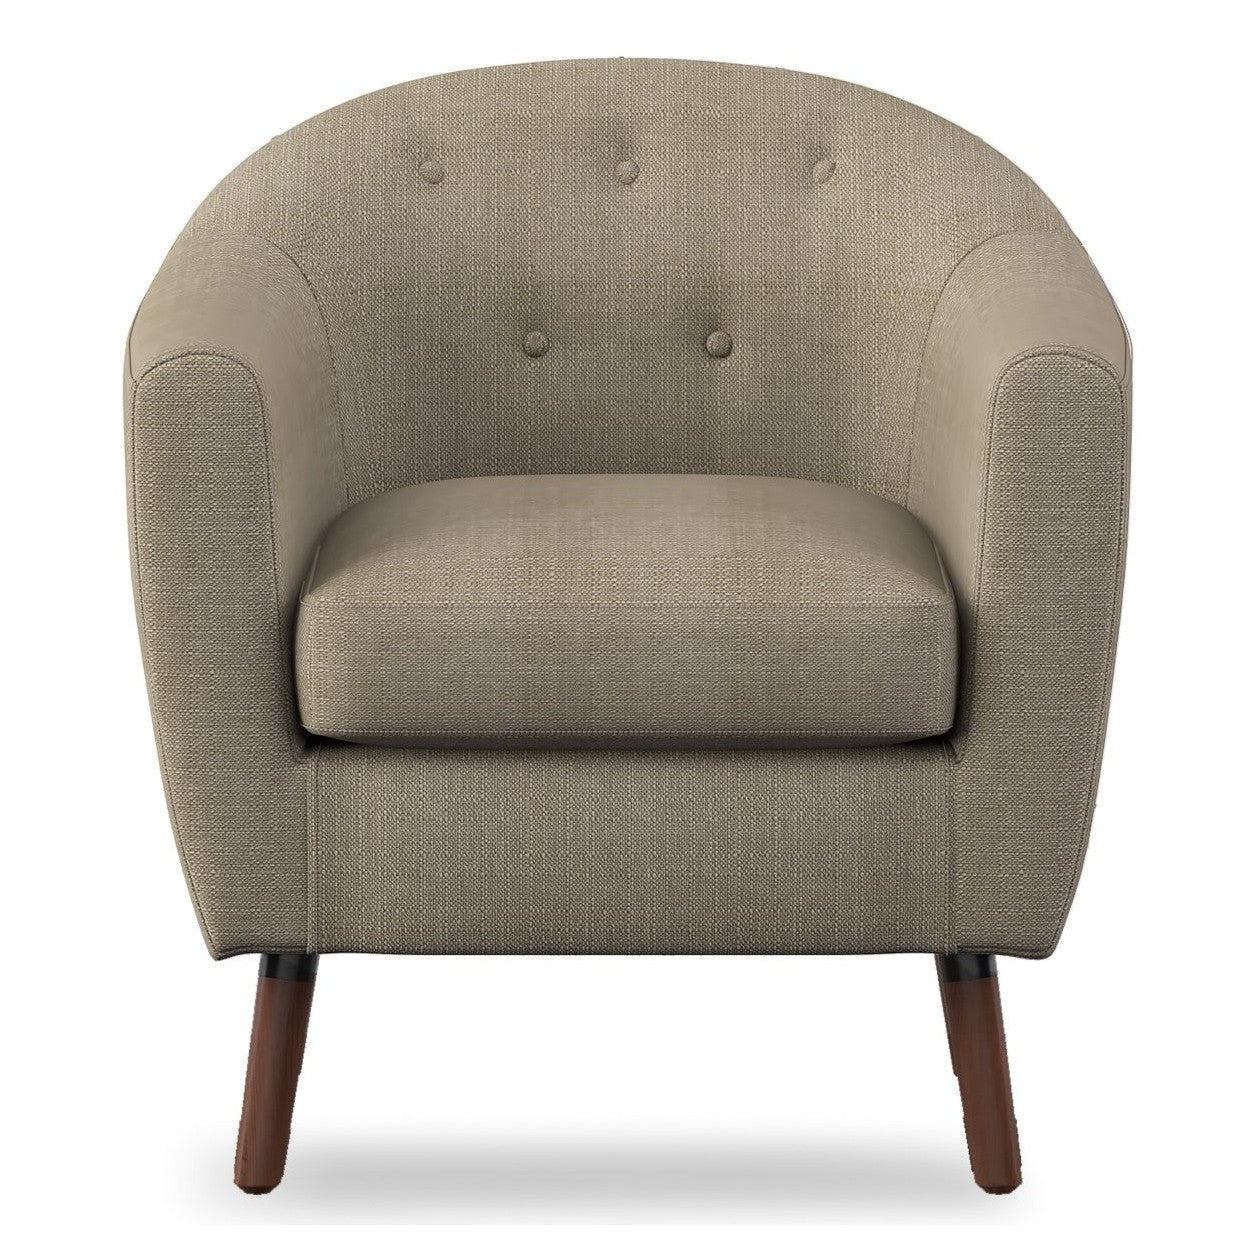 ACCENT CHAIR, BEIGE 100% POLYESTER 1192BE